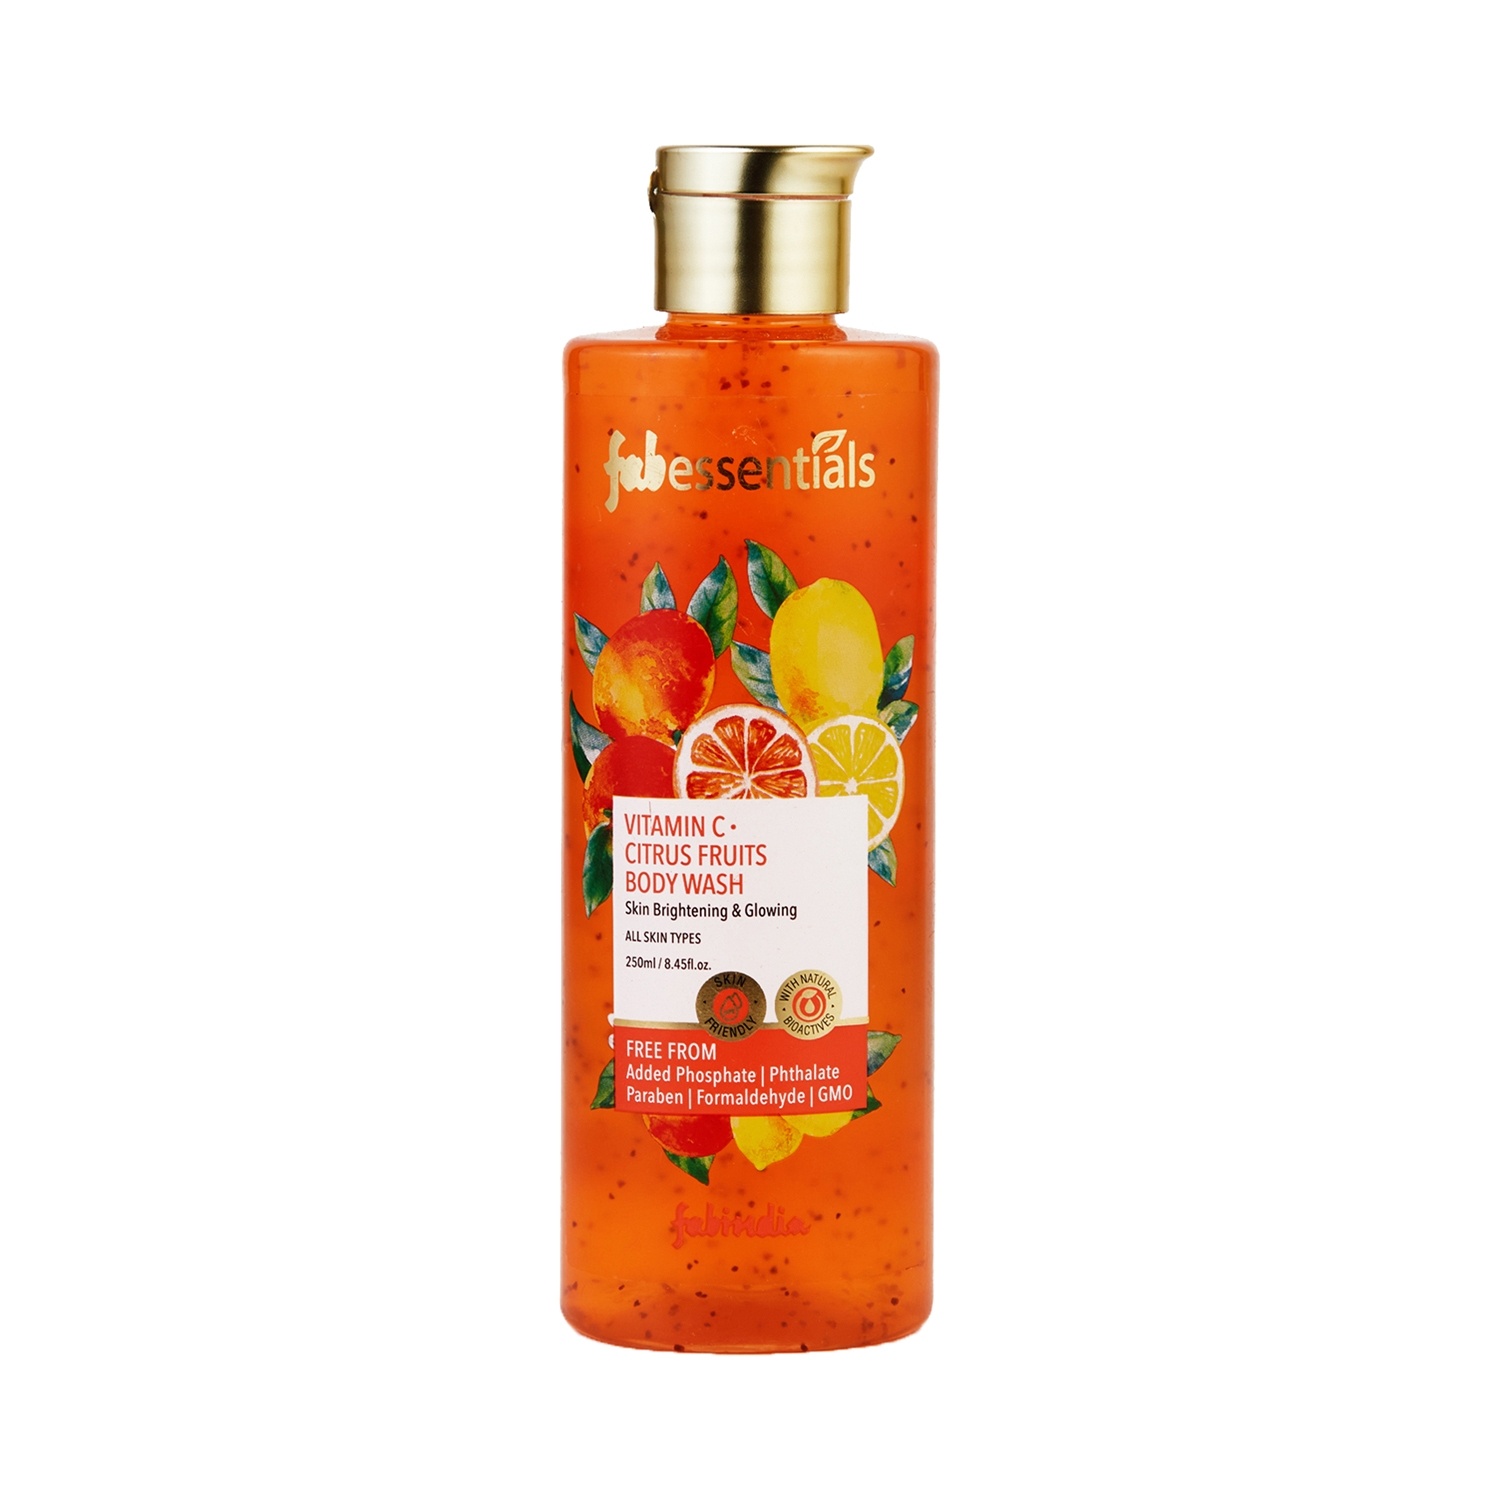 Fabessentials by Fabindia | Fabessentials by Fabindia Vitamin C Citrus Fruits Body Wash With Orange Oil, Lemon, Amla & Apricot Seed (250ml)